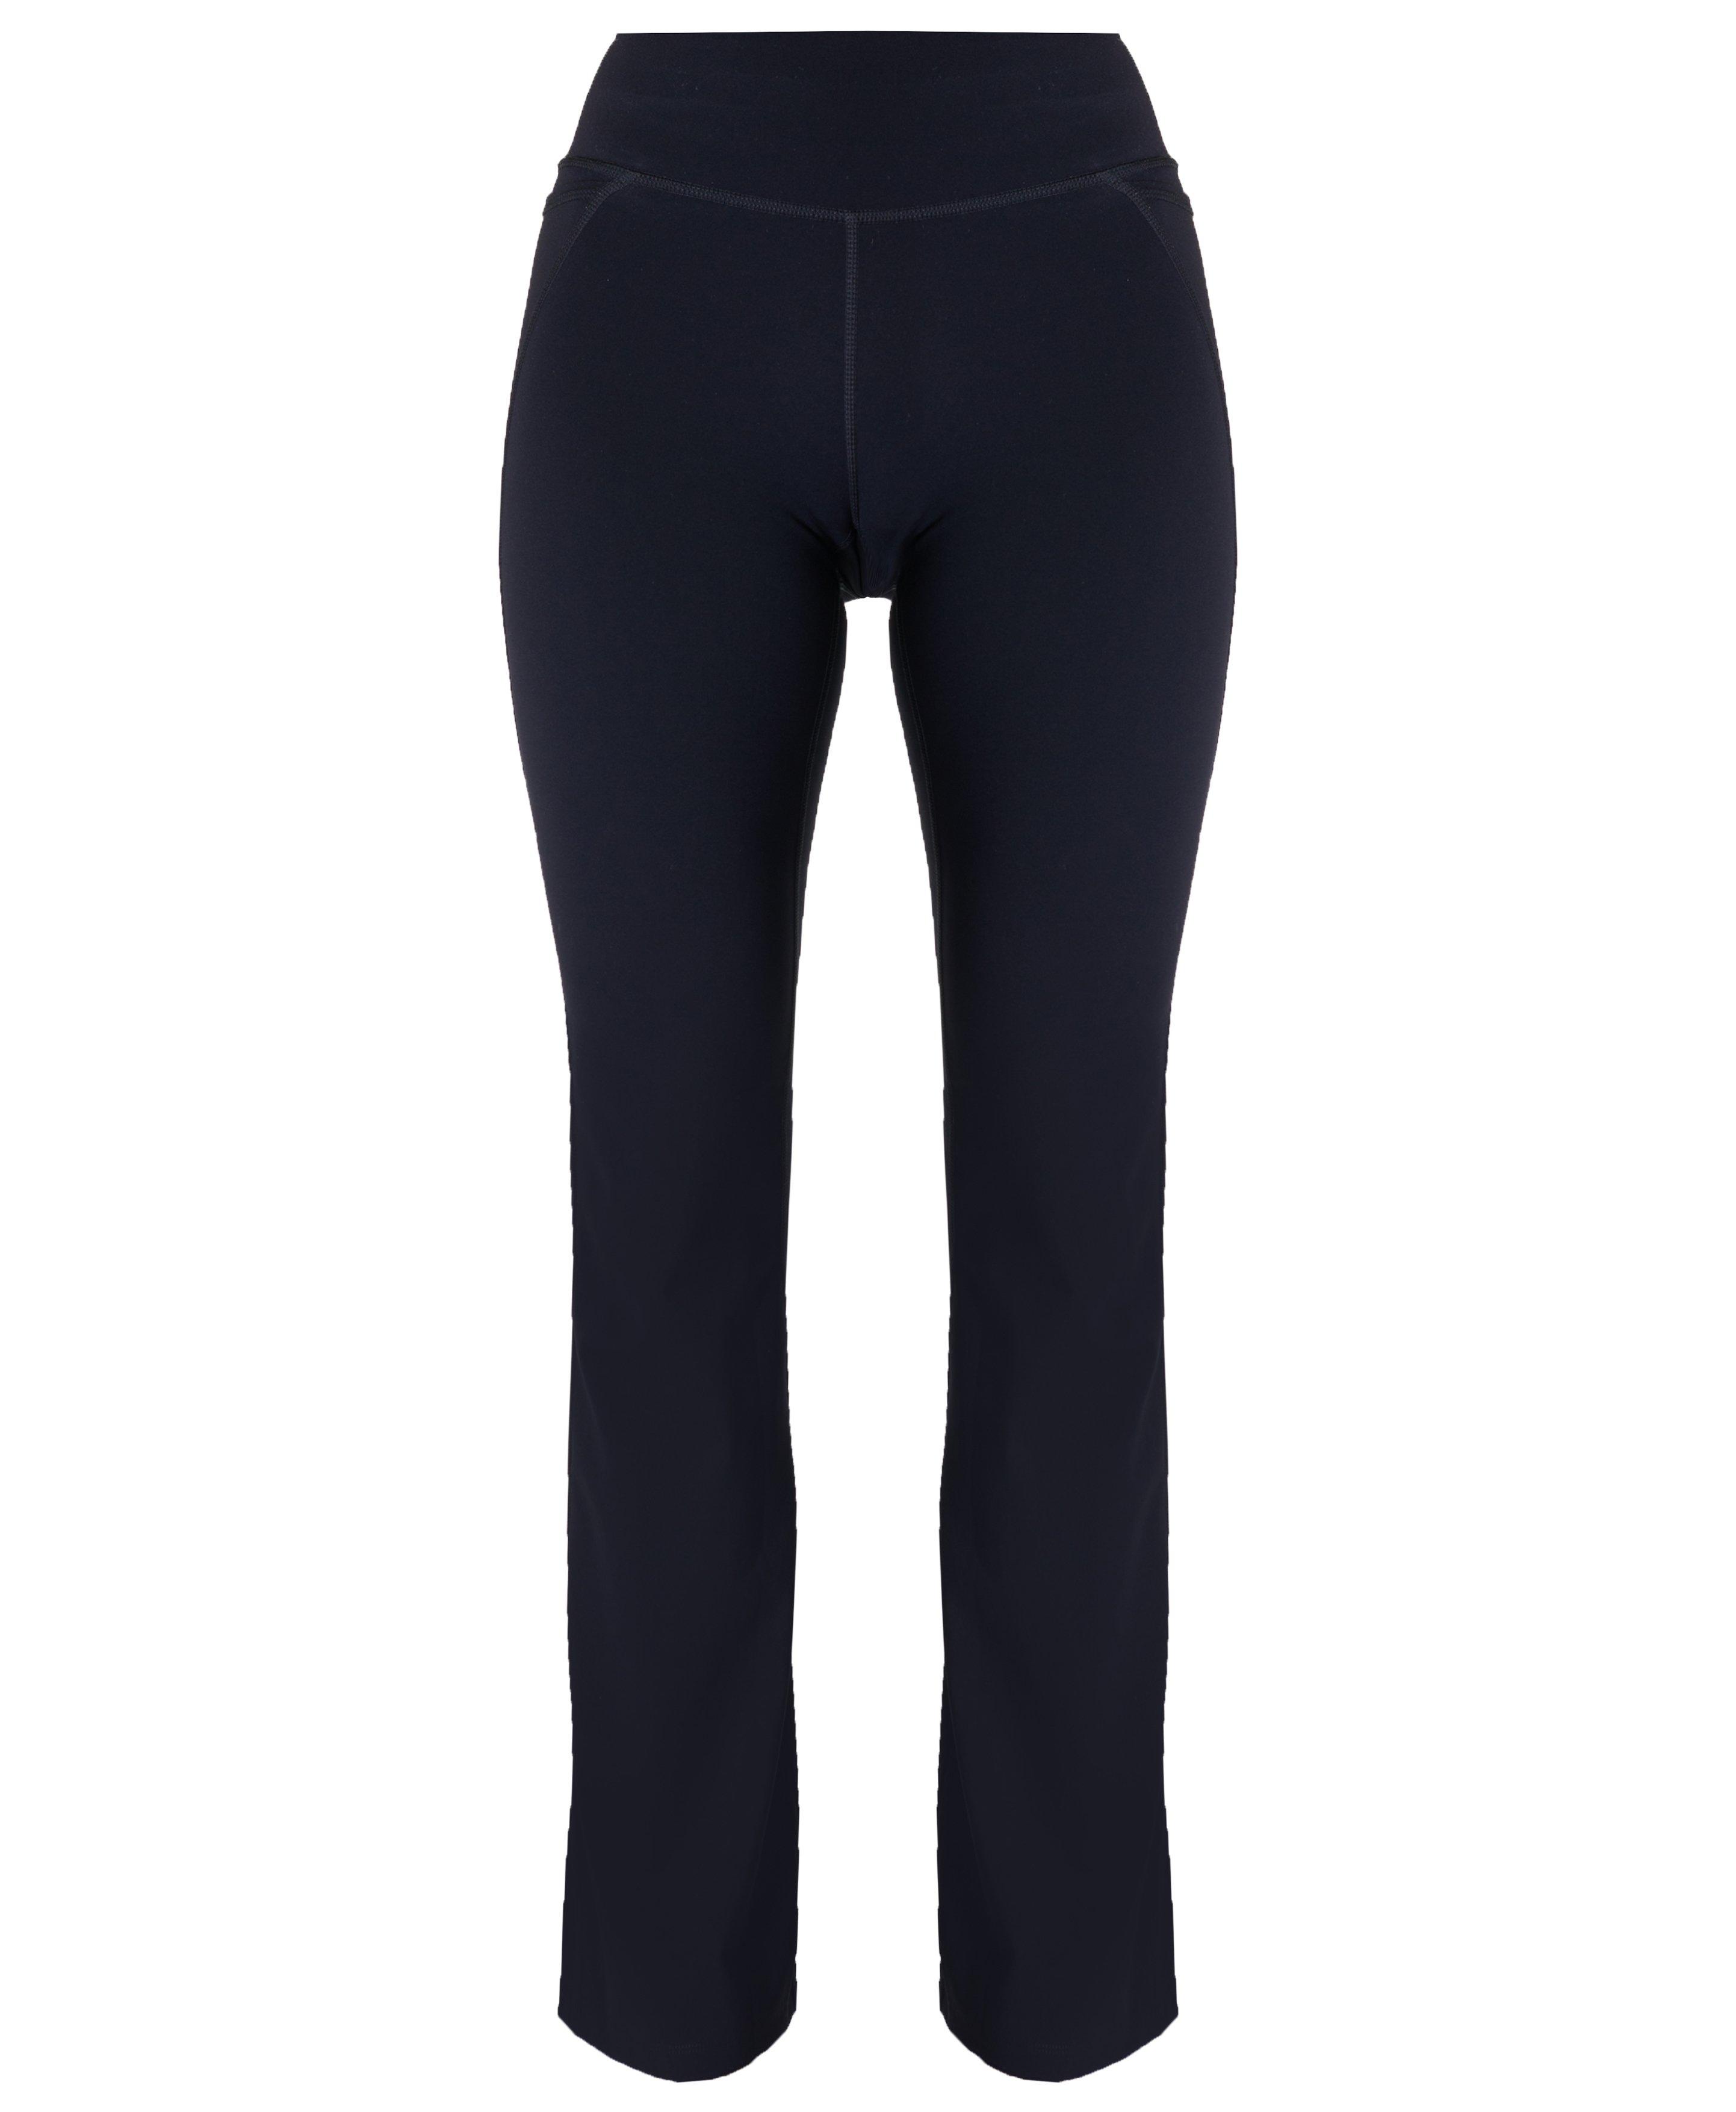 Buy Bootcut Yoga Pants for Women High Waist Workout Pants for